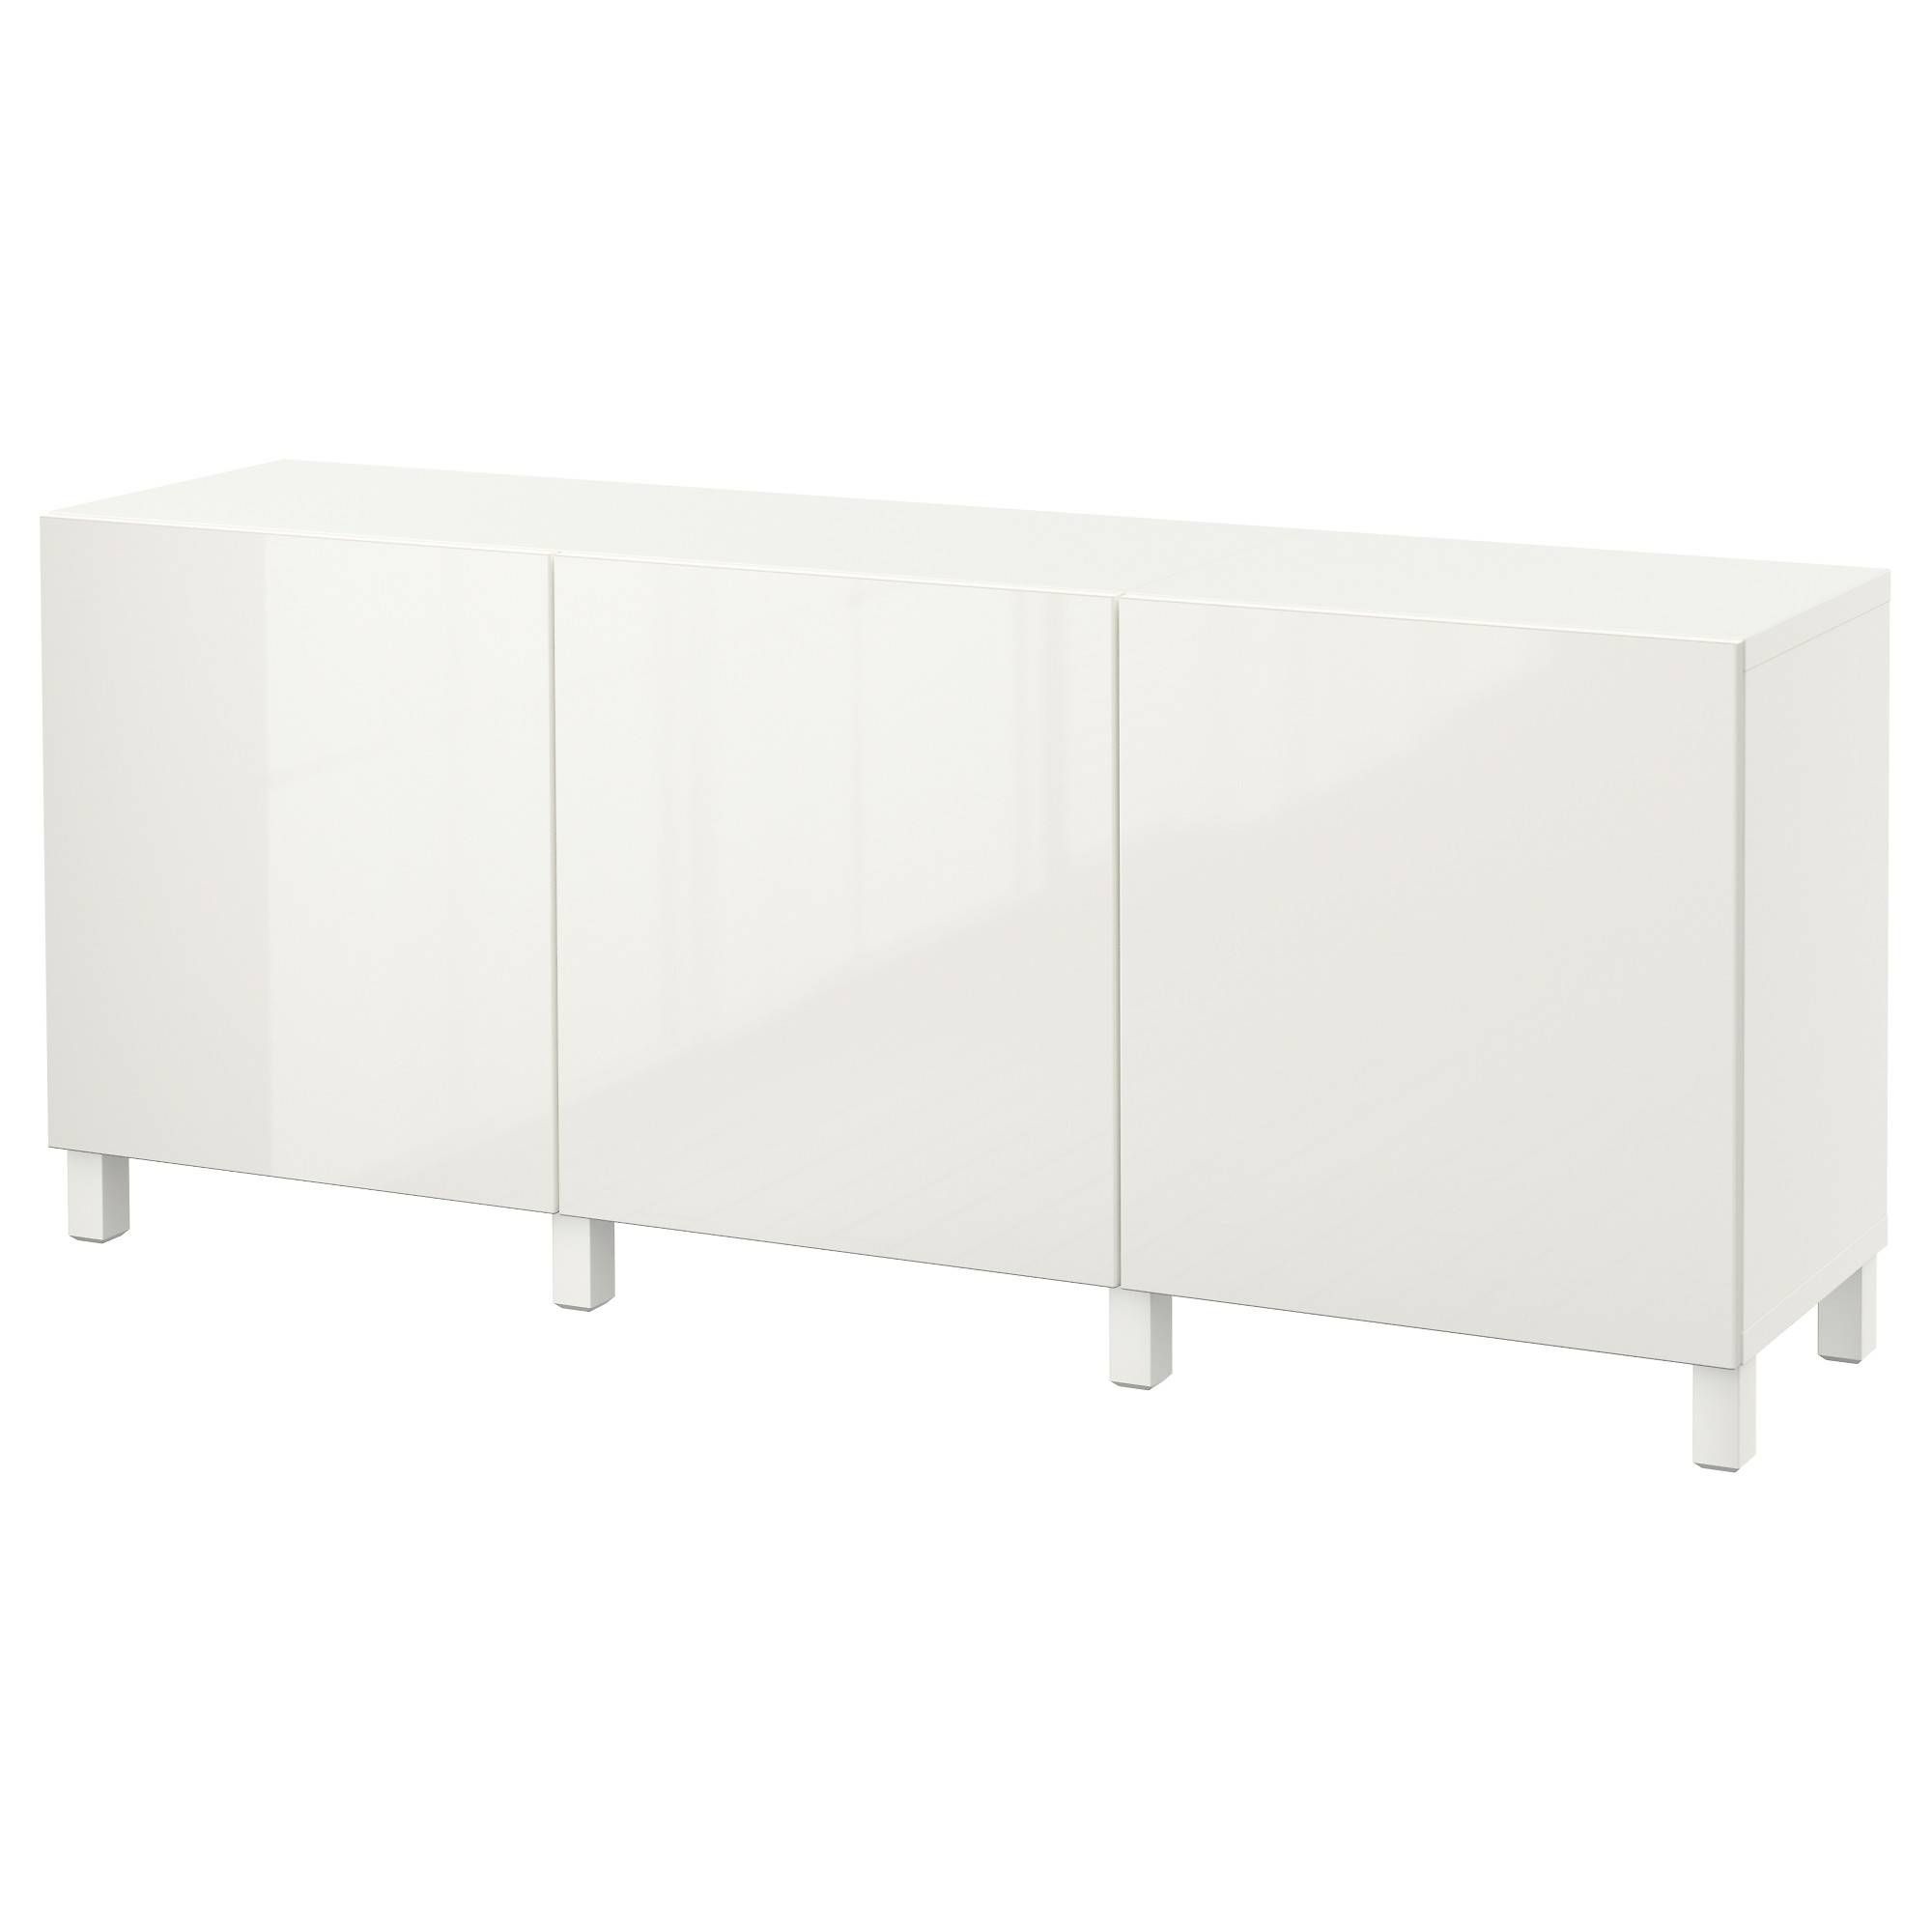 Bestå Storage Combination With Doors – White/selsviken High Gloss Within High Gloss Sideboards (View 16 of 20)